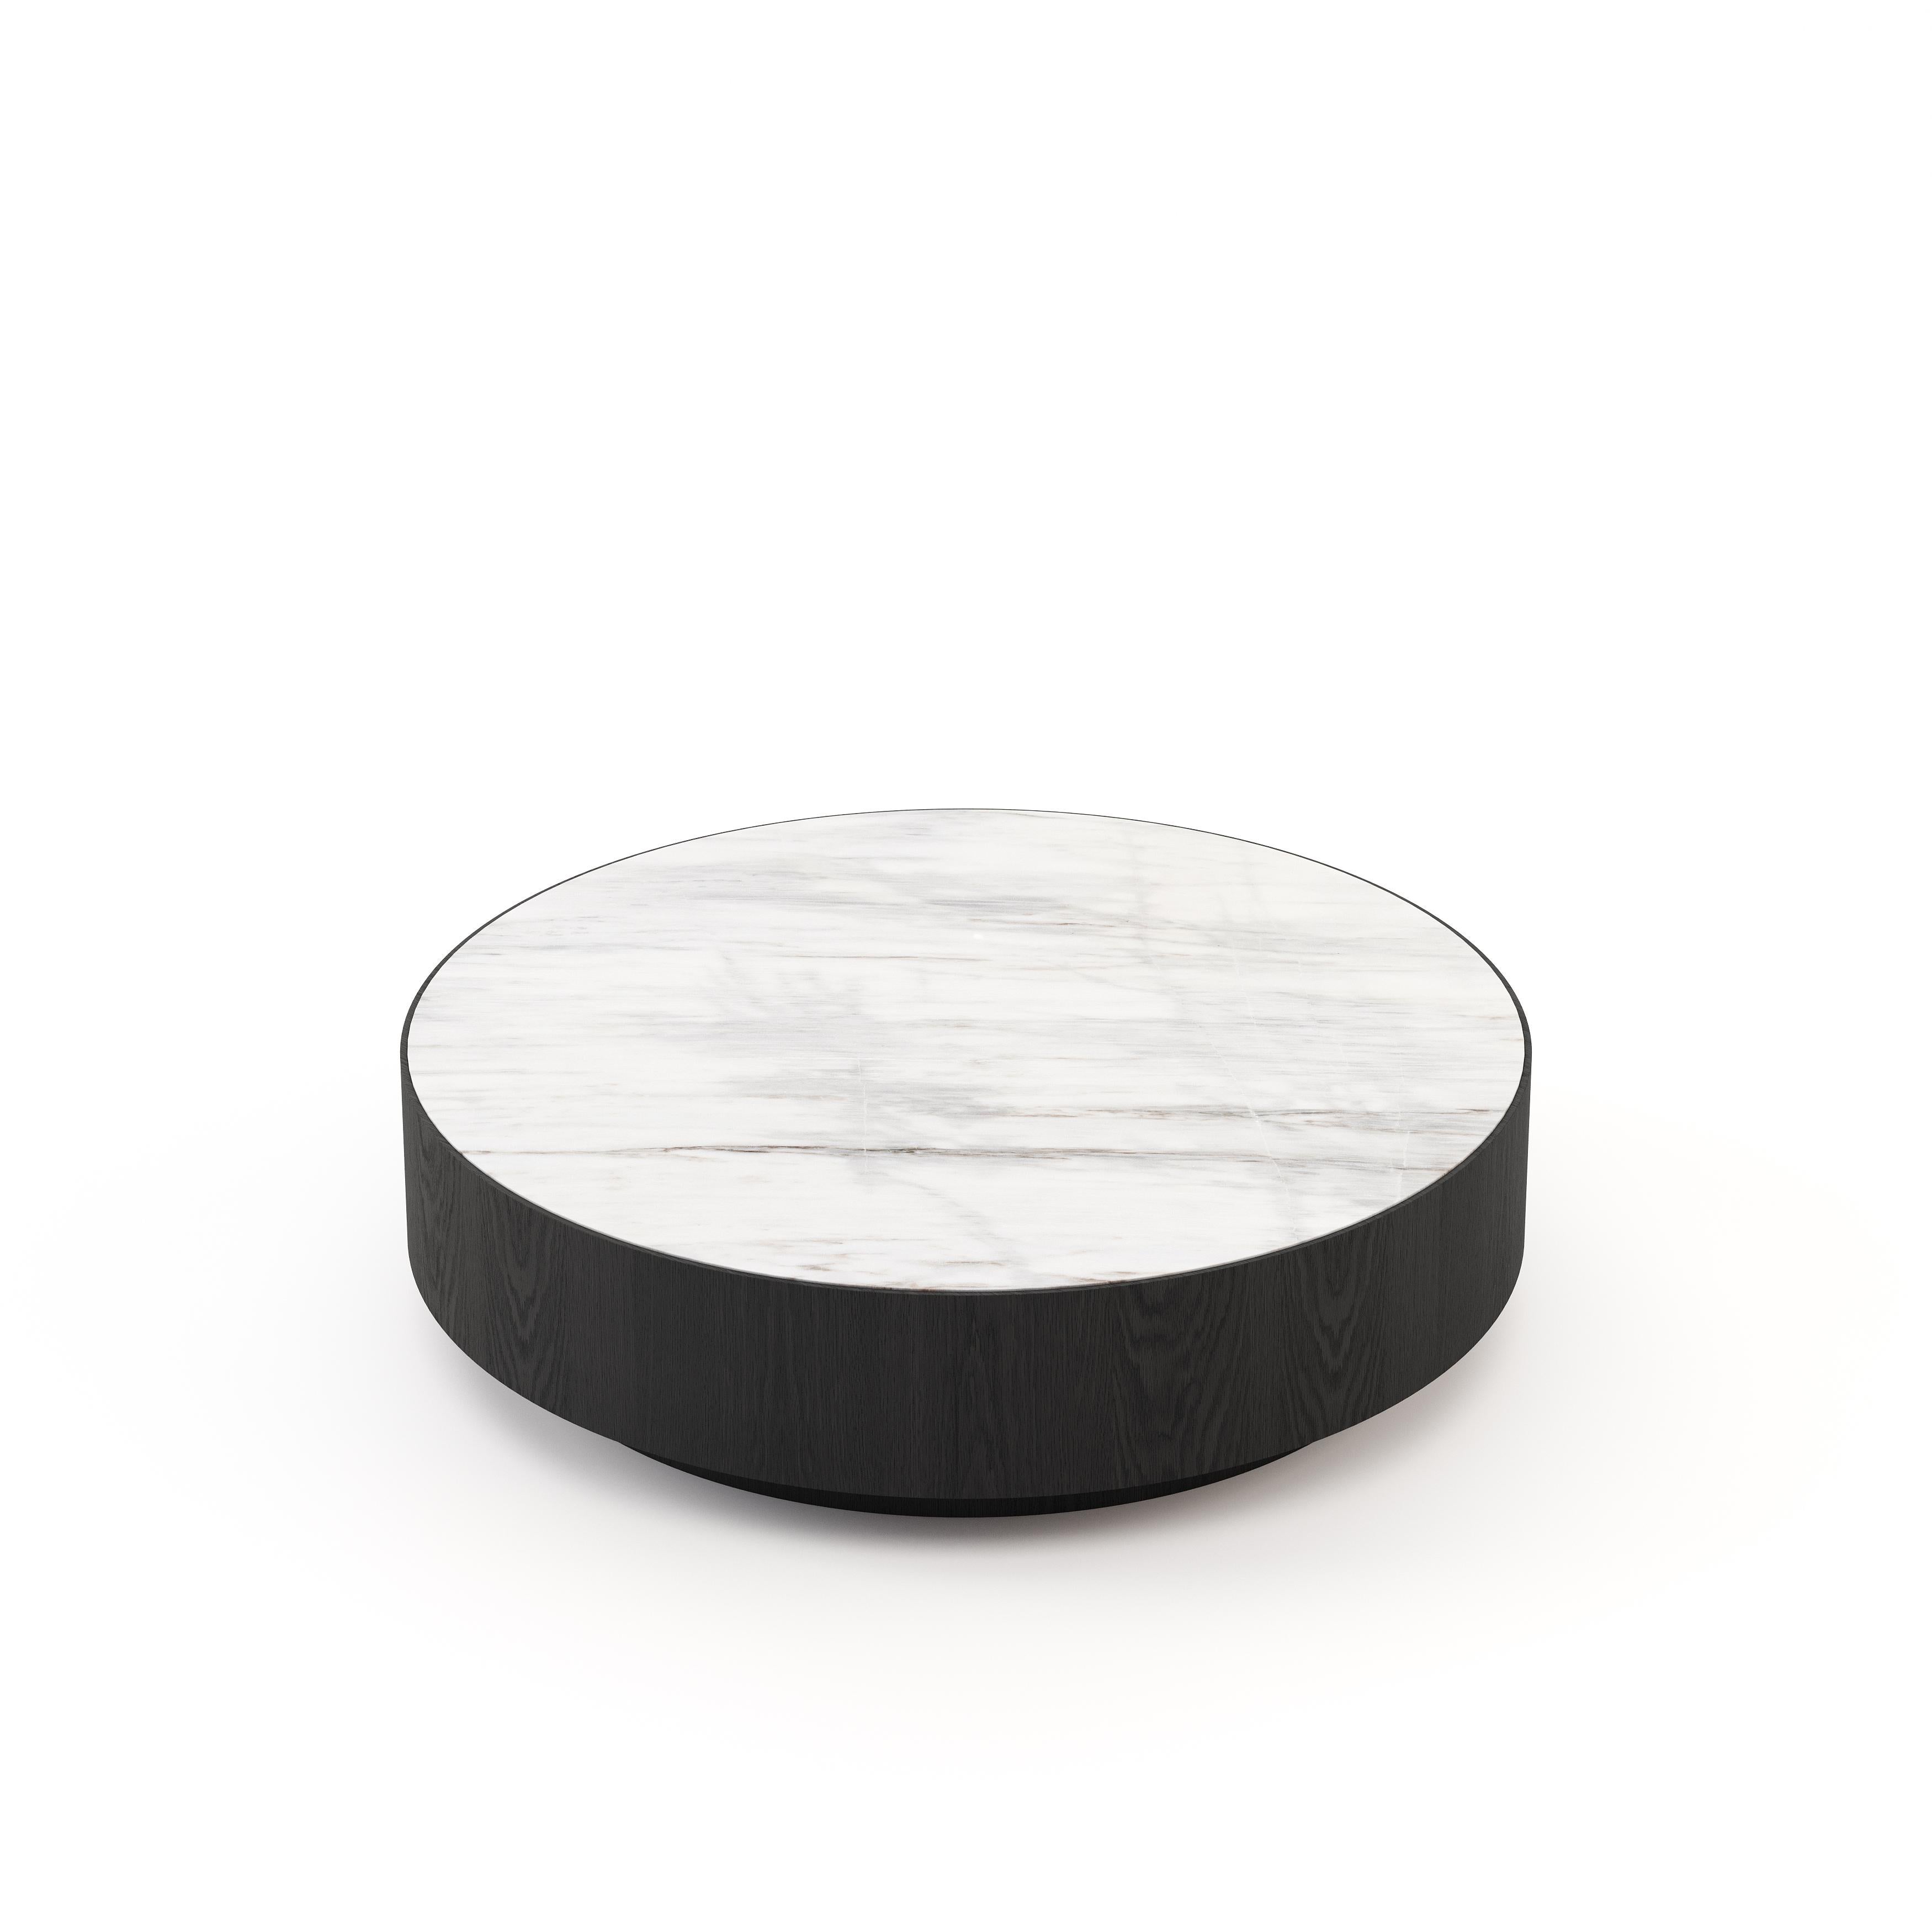 Gold coffee table was designed to be in the very heart of the most memorable interior design projects. Handmade by Laskasas artisans, this impressive center table features a smoked marble top and a wooden body. A breathtaking mid-century touch of